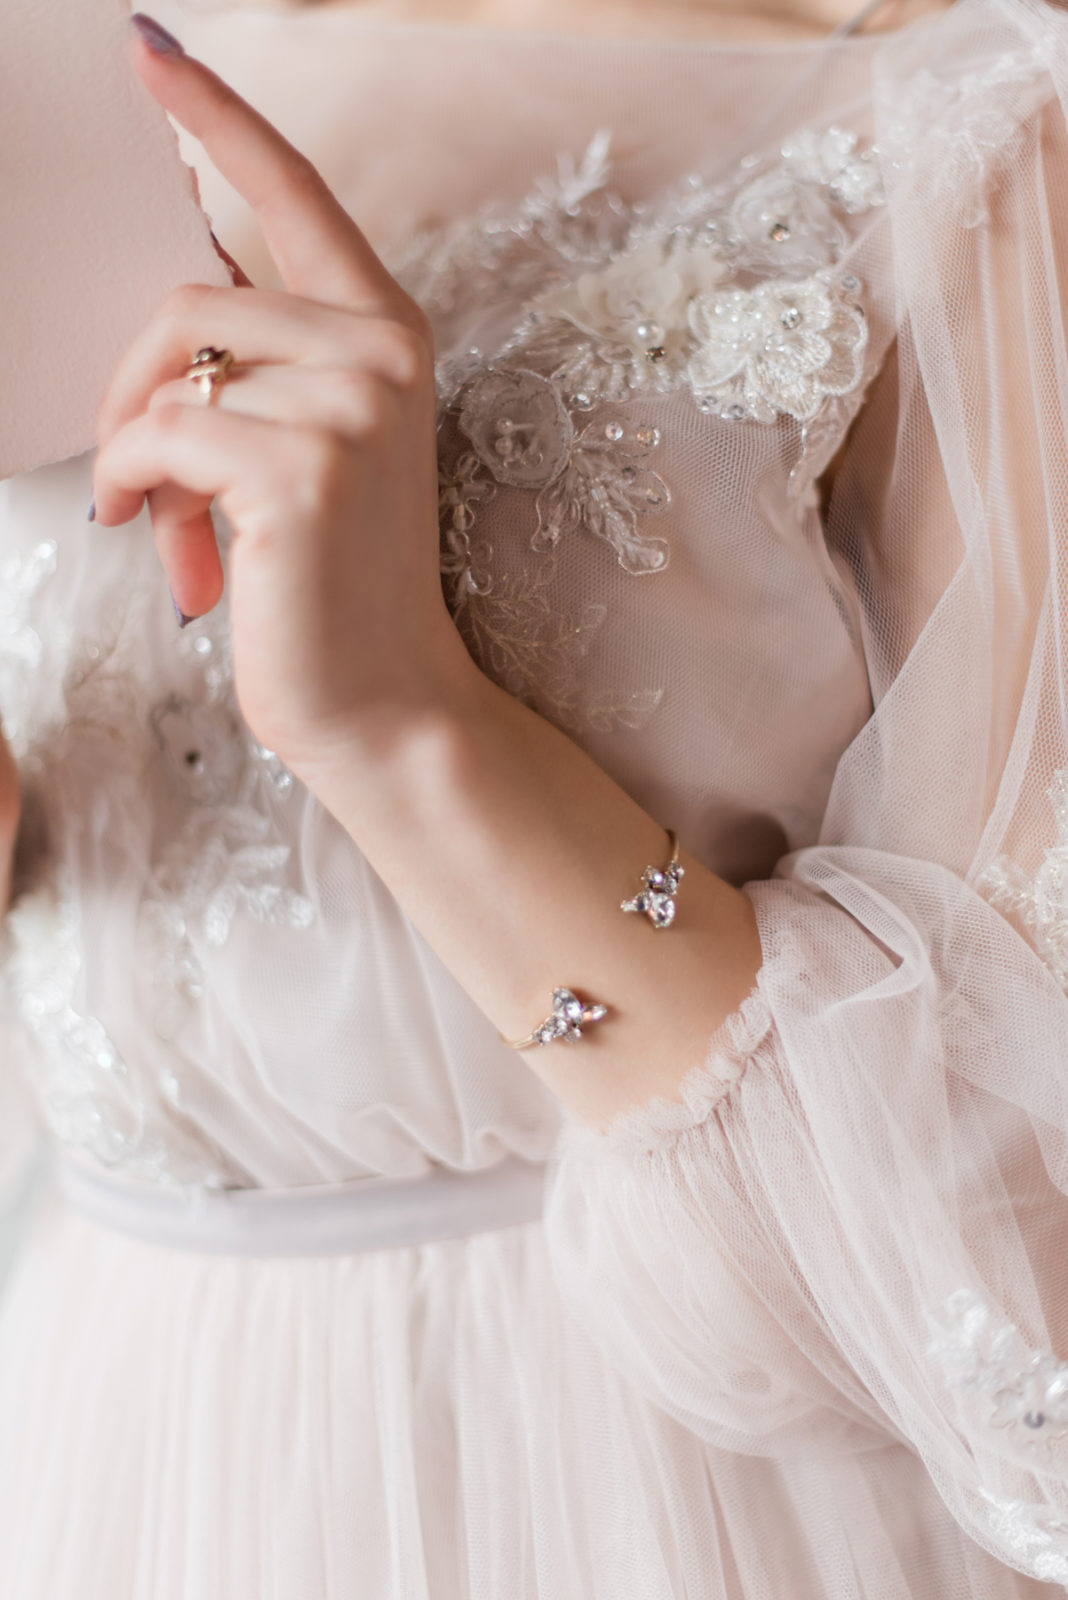 Romantically Regal Bridal Inspiration at the Royale YYC - wedding inspiration featured on Brontë Bride